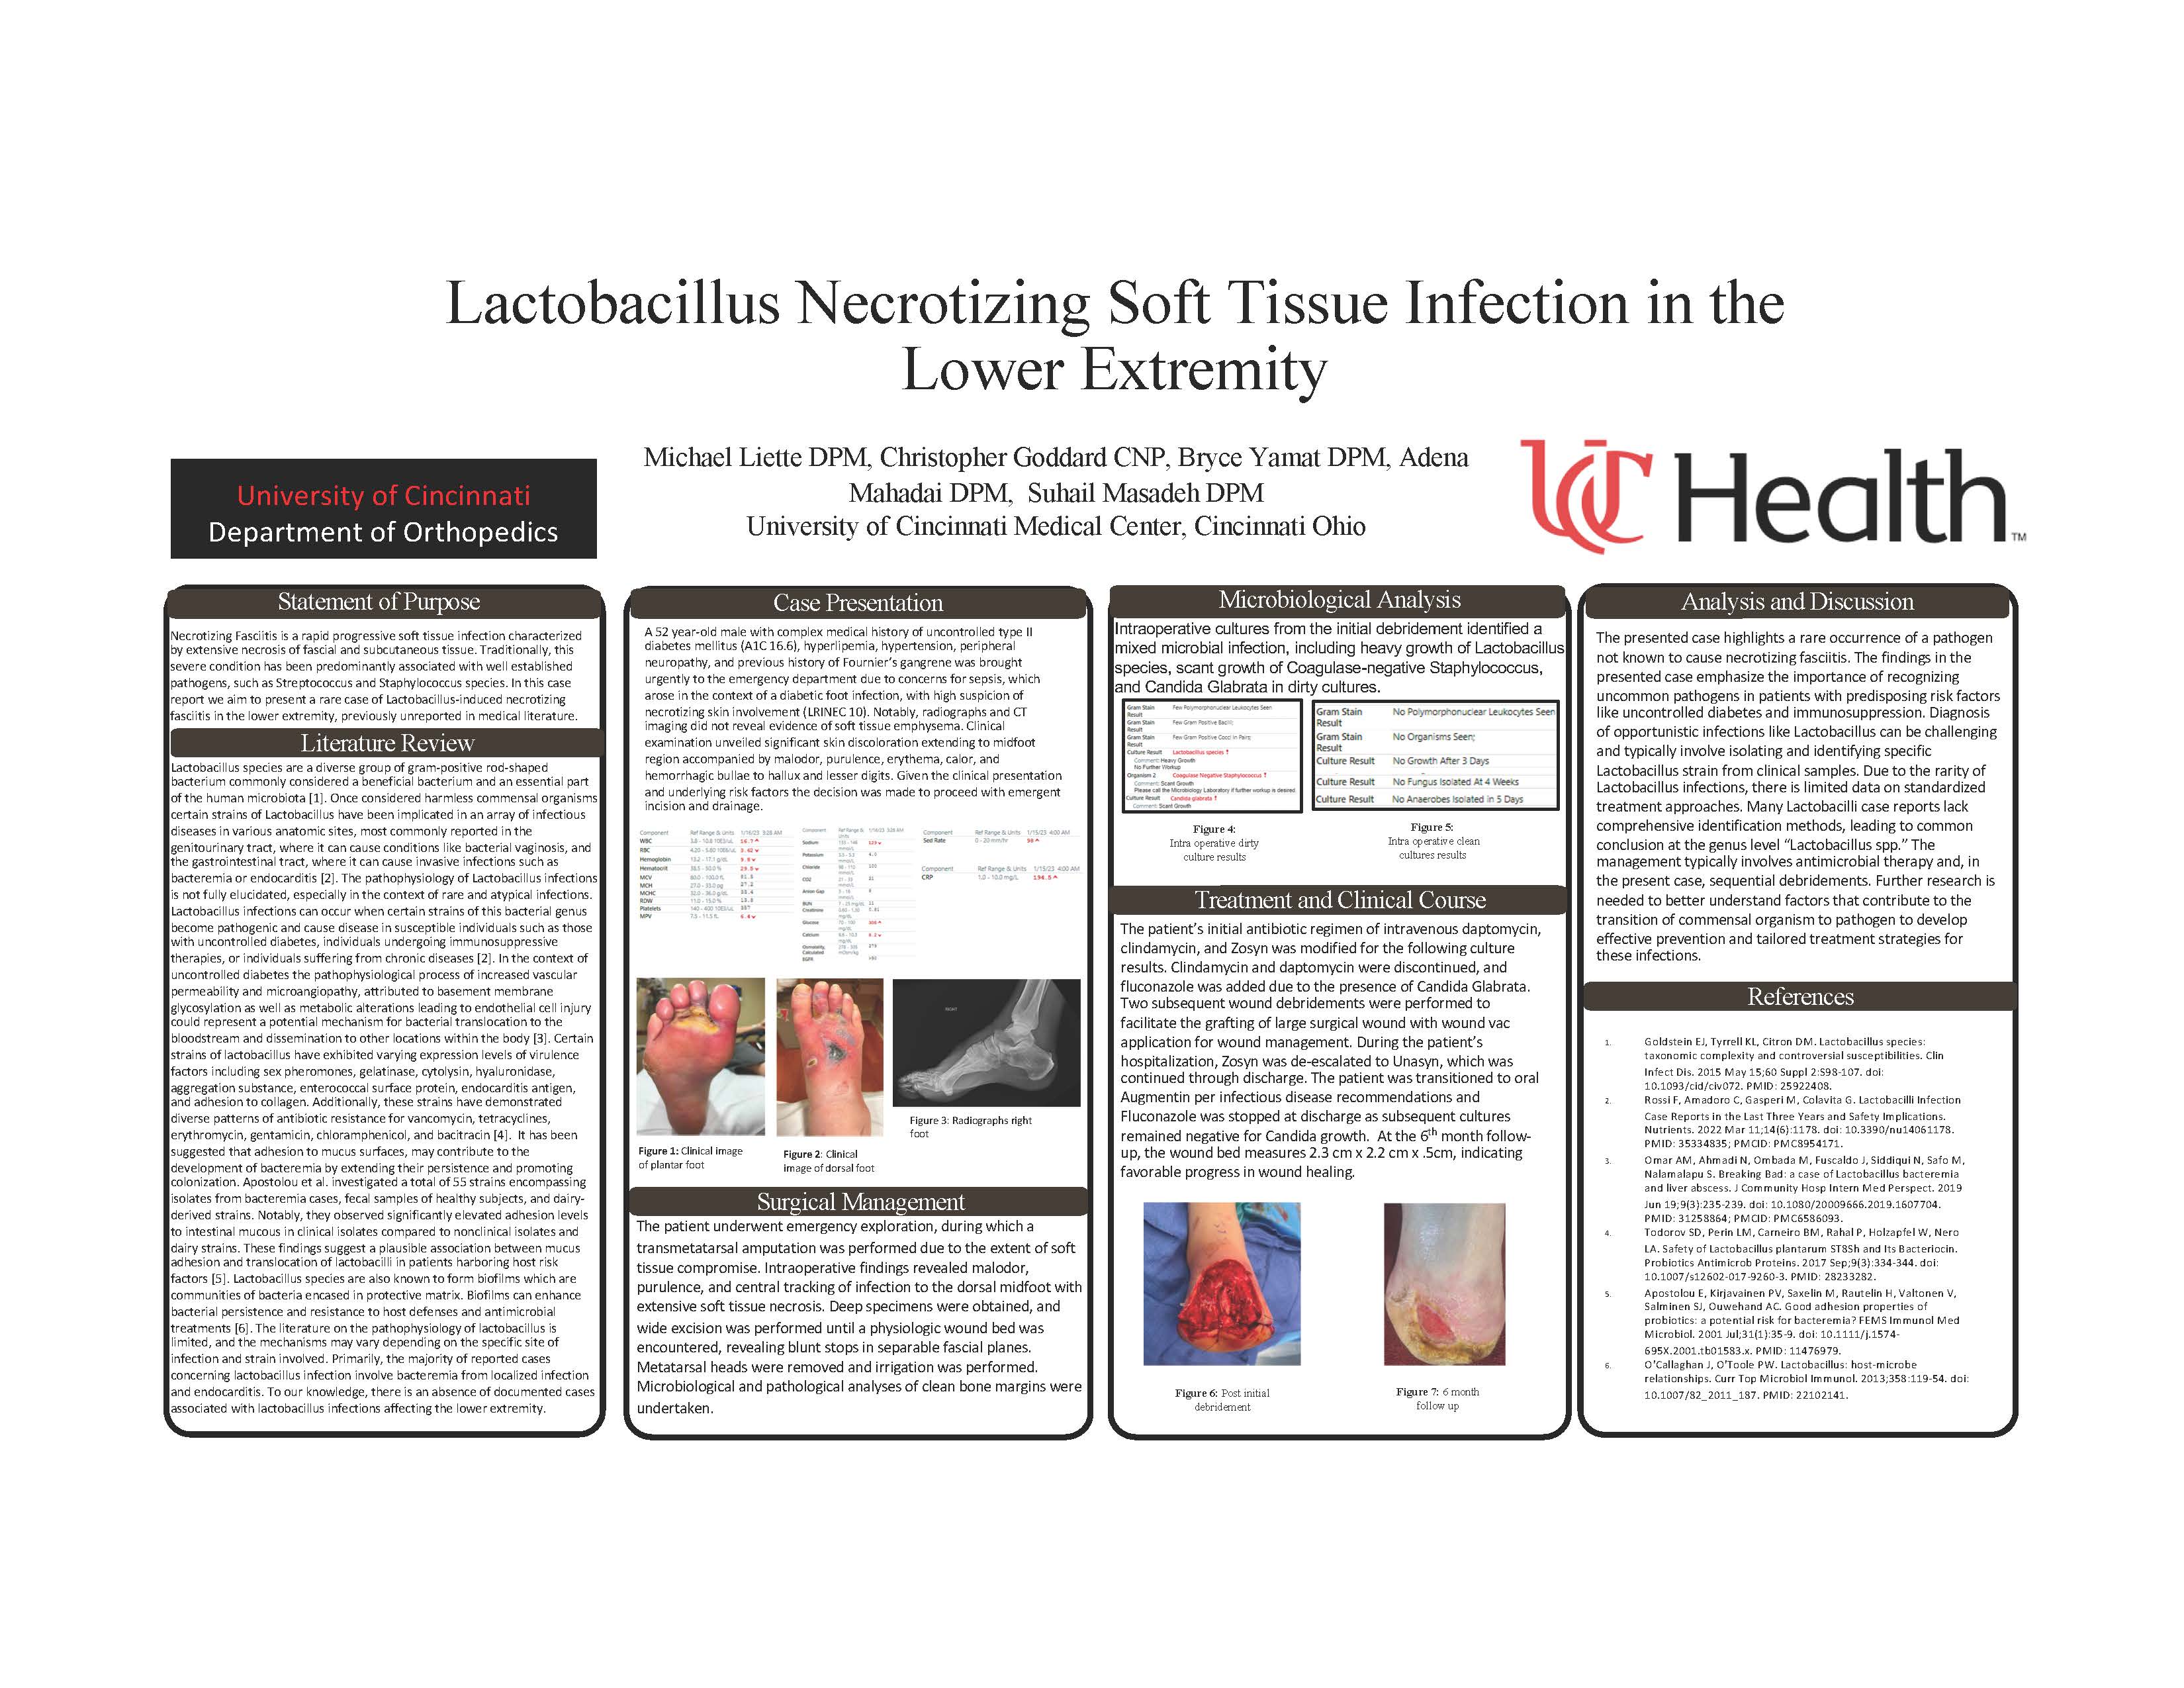 Lactobacillus Necrotizing Soft Tissue Infection in the Lower Extremity